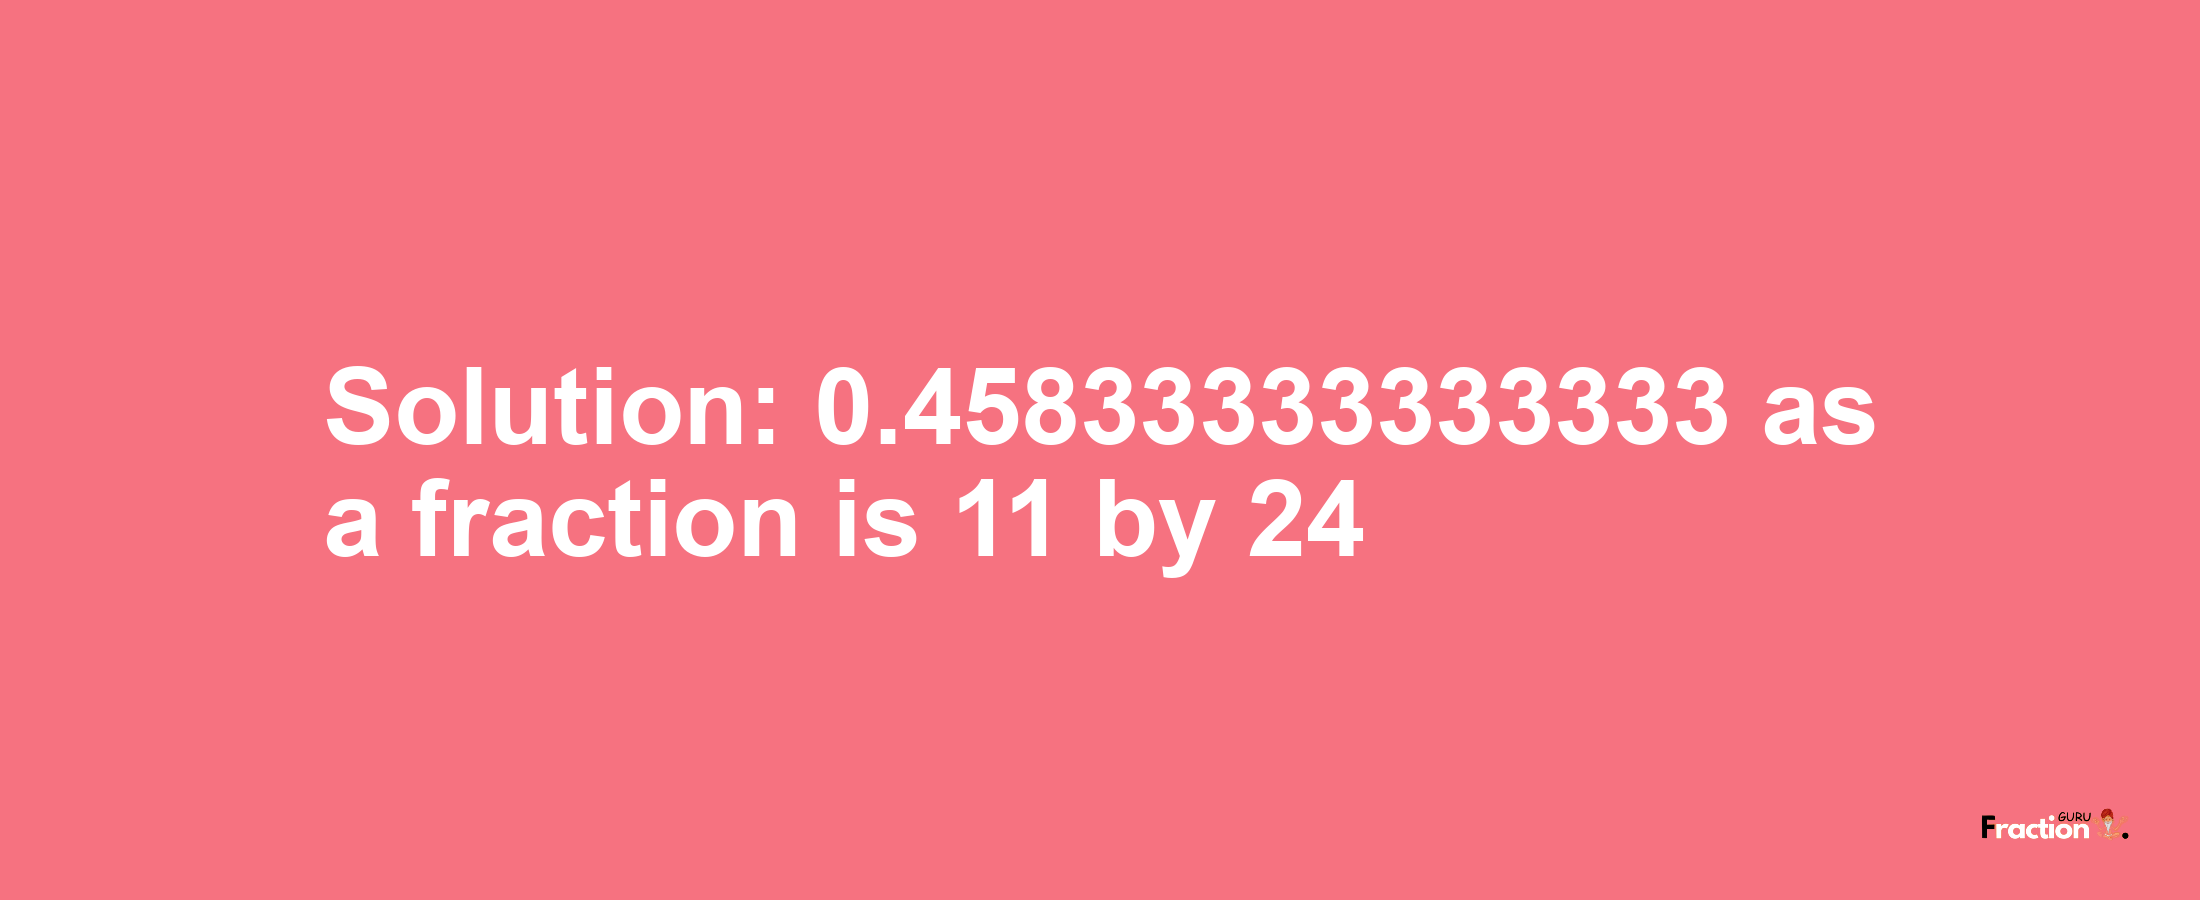 Solution:0.45833333333333 as a fraction is 11/24